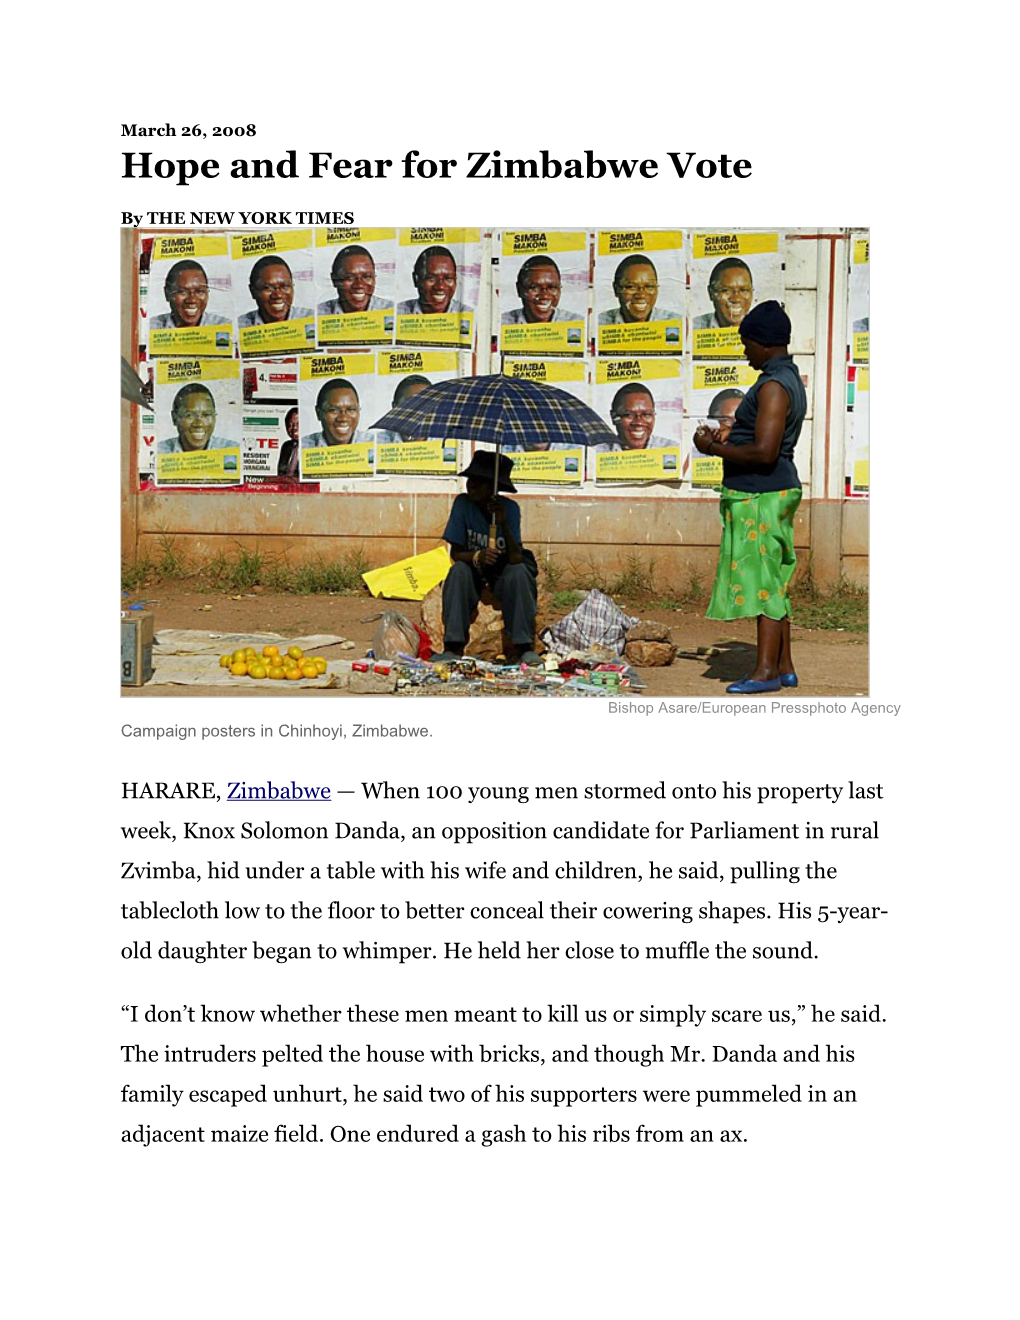 Hope and Fear for Zimbabwe Vote